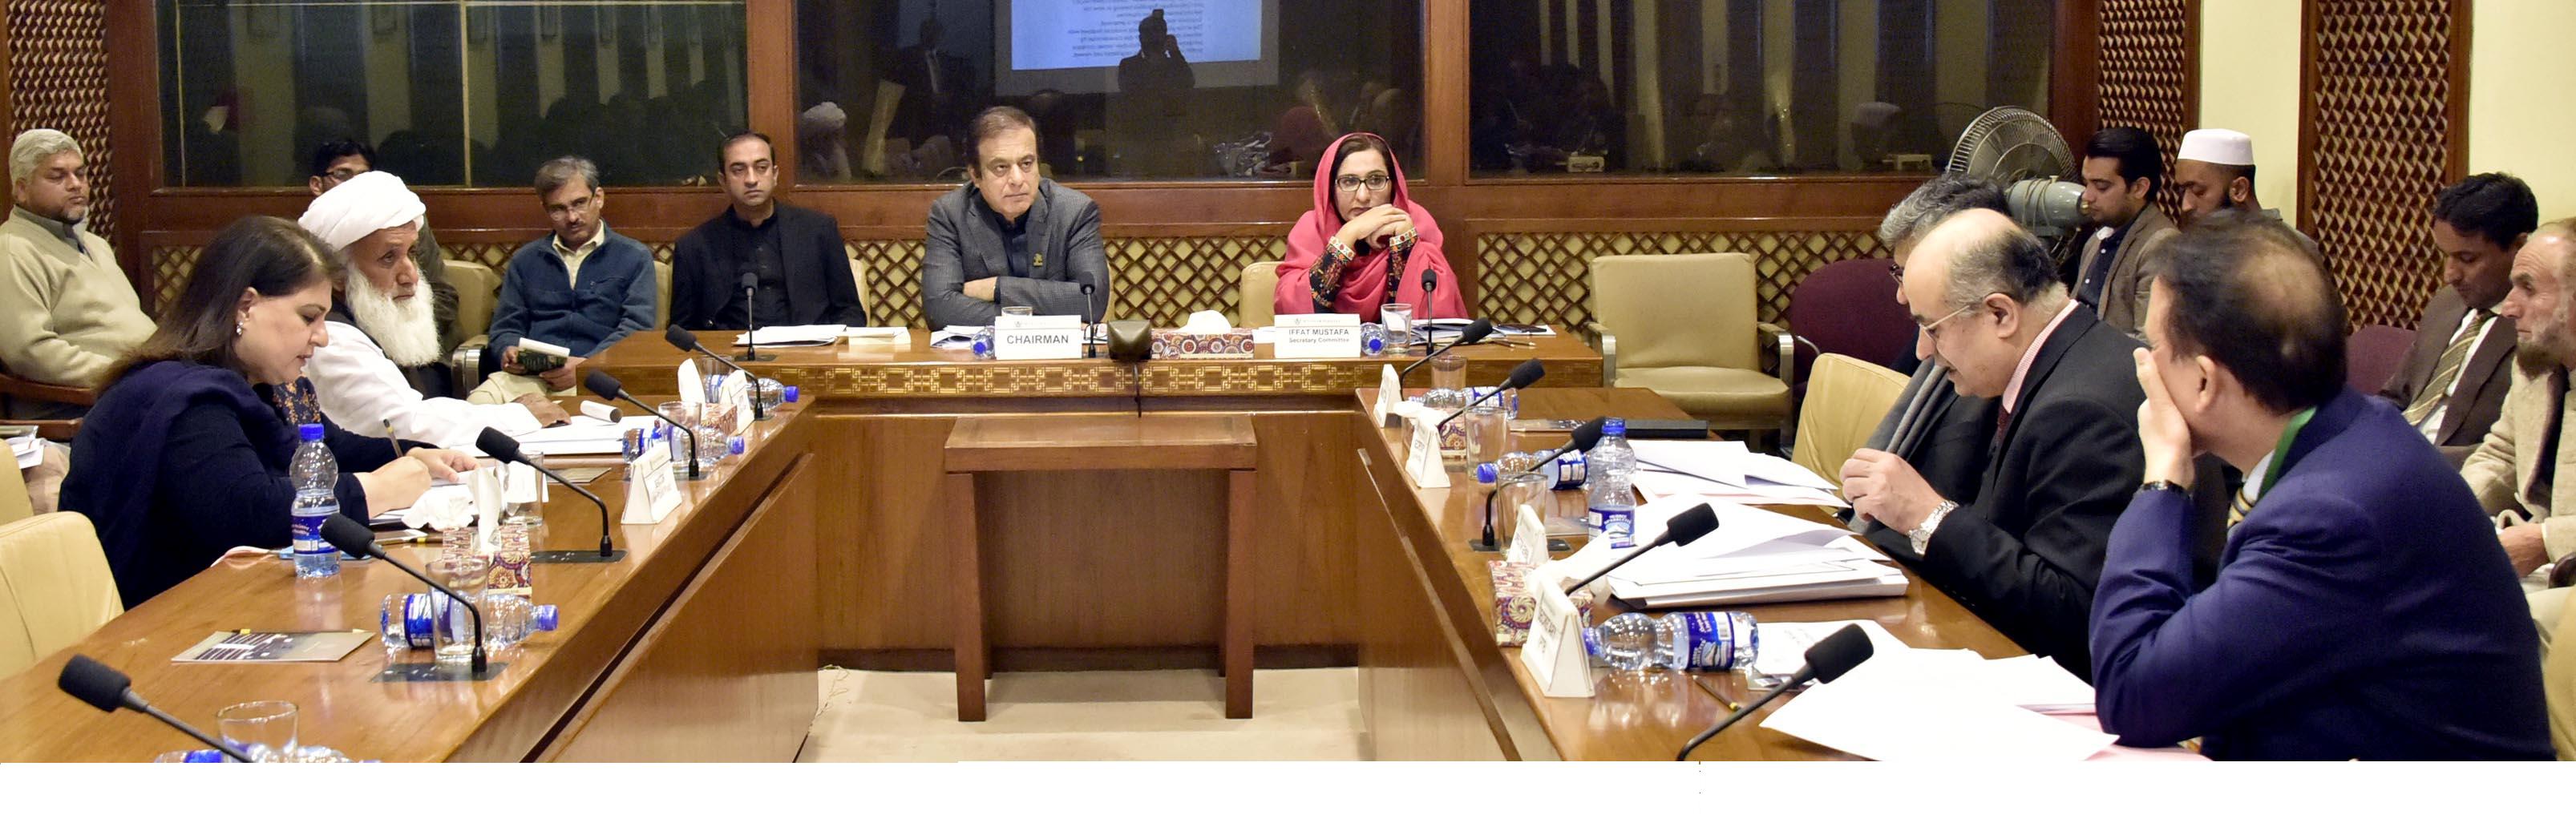 SENATOR SYED SHIBLI FARAZ, CHAIRMAN SENATE STANDING COMMITTEE ON COMMERCE AND TEXTILE INDUSTRY PRESIDING OVER A MEETING OF THE COMMITTEE AT PARLIAMENT HOUSE ISLAMABAD ON JANUARY 16, 2018.